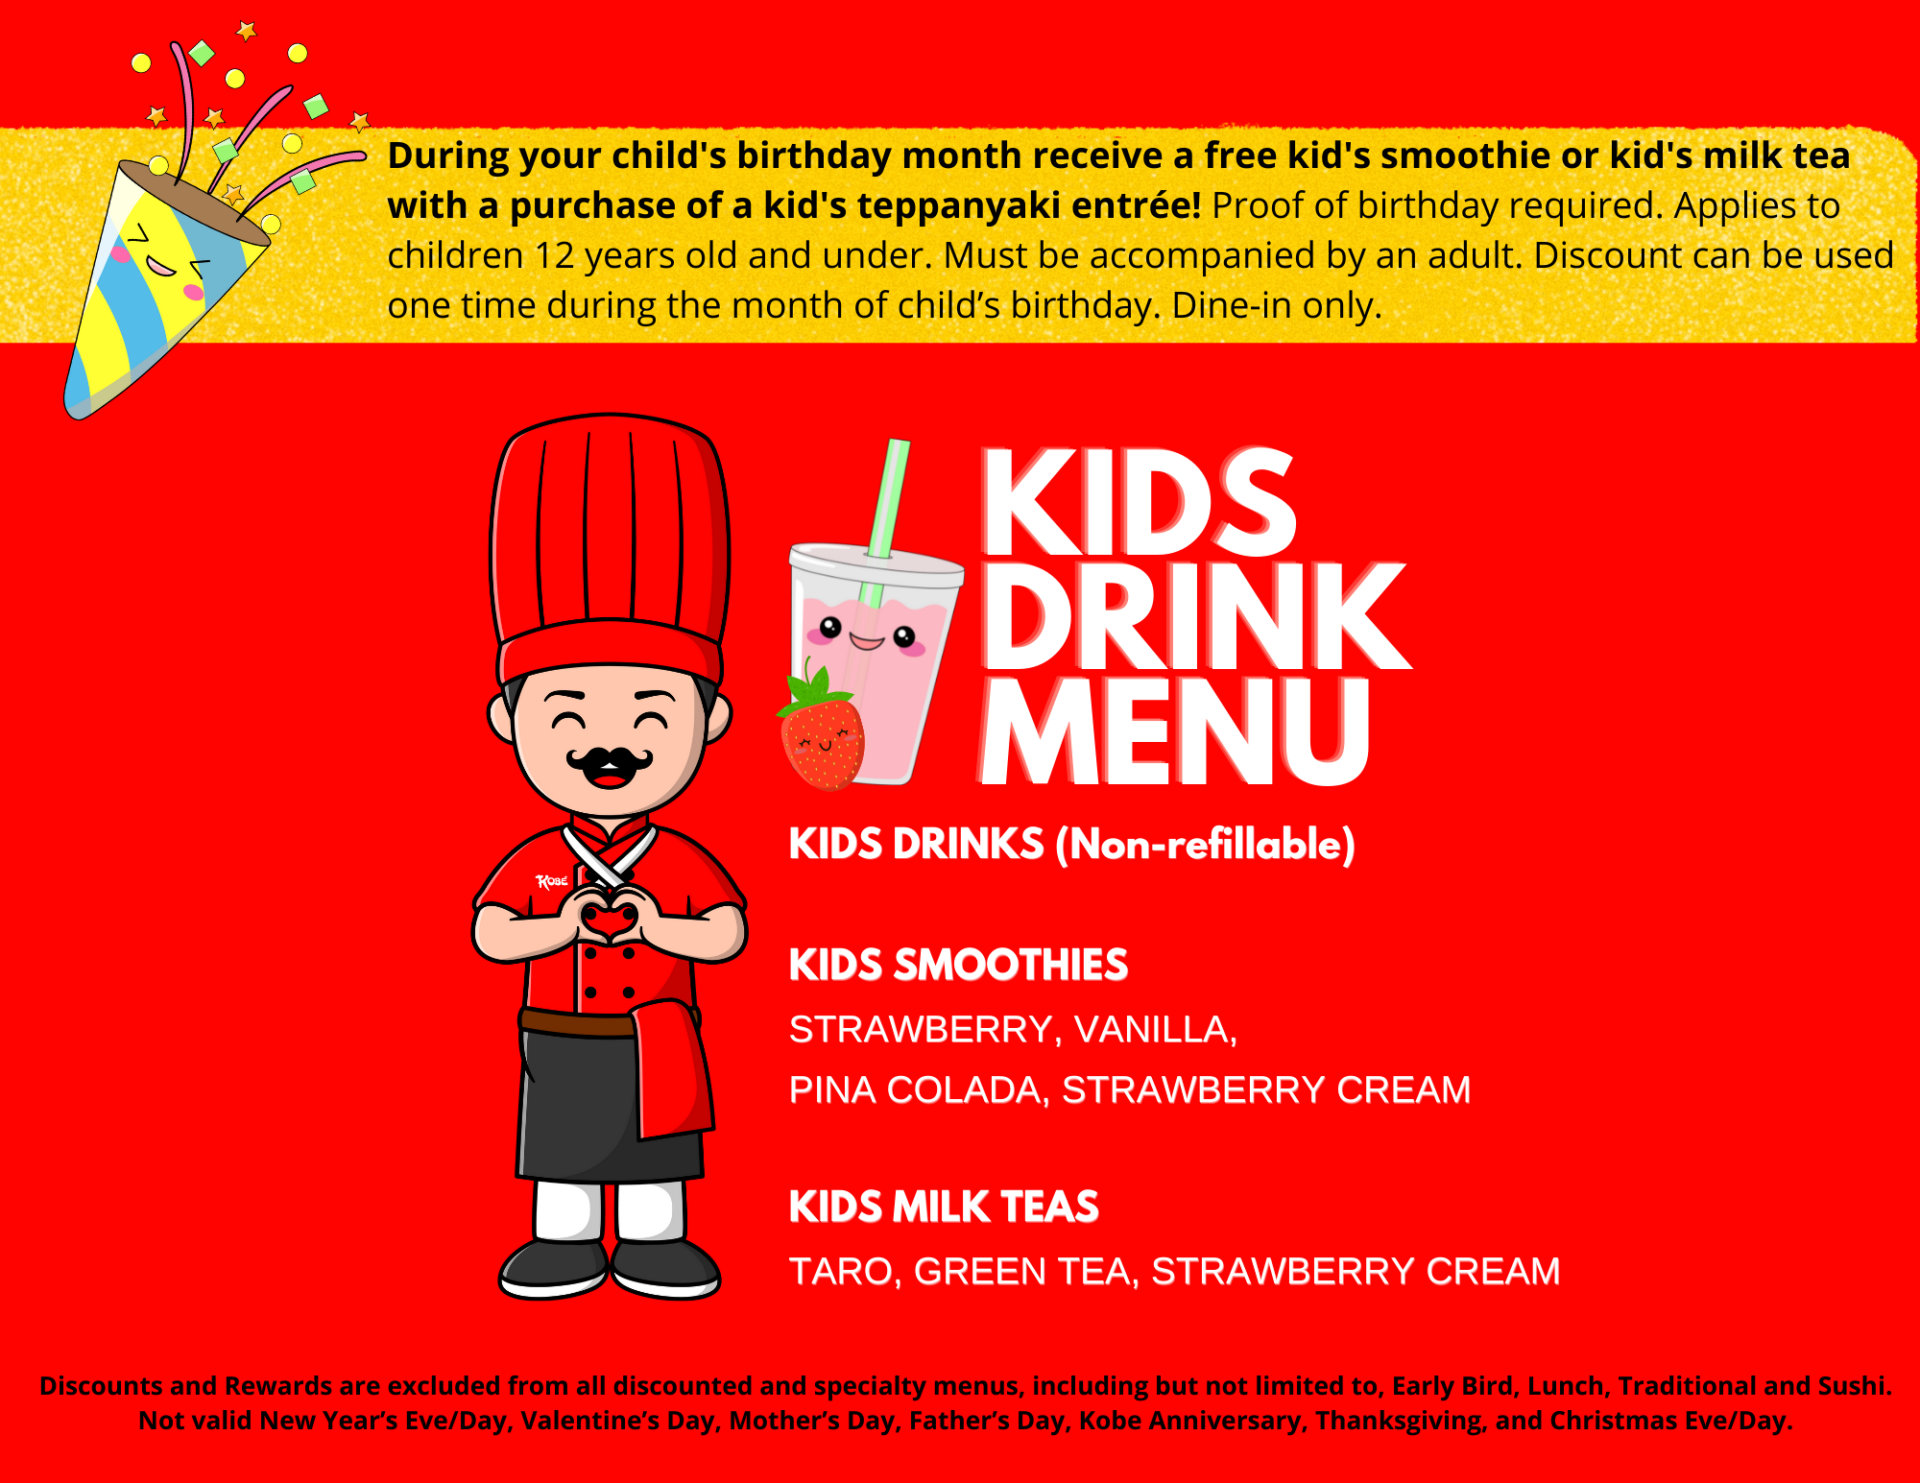 During your child's birthday month receive a free kid's smoothie or kid's milk tea with a purchase of a kid's teppanyaki entrée! Proof of birthday required. Applies to children 12 years old and under. Must be accompanied by an adult. Discount can be used one time during the month of child’s birthday. Dine-in only. Discounts and Rewards are excluded from all discounted and specialty menus, including but not limited to, Early Bird, Lunch, Traditional and Sushi. Not valid New Year’s Eve/Day, Valentine’s Day, Mother’s Day, Father’s Day, Kobe Anniversary, Thanksgiving, and Christmas Eve/Day.